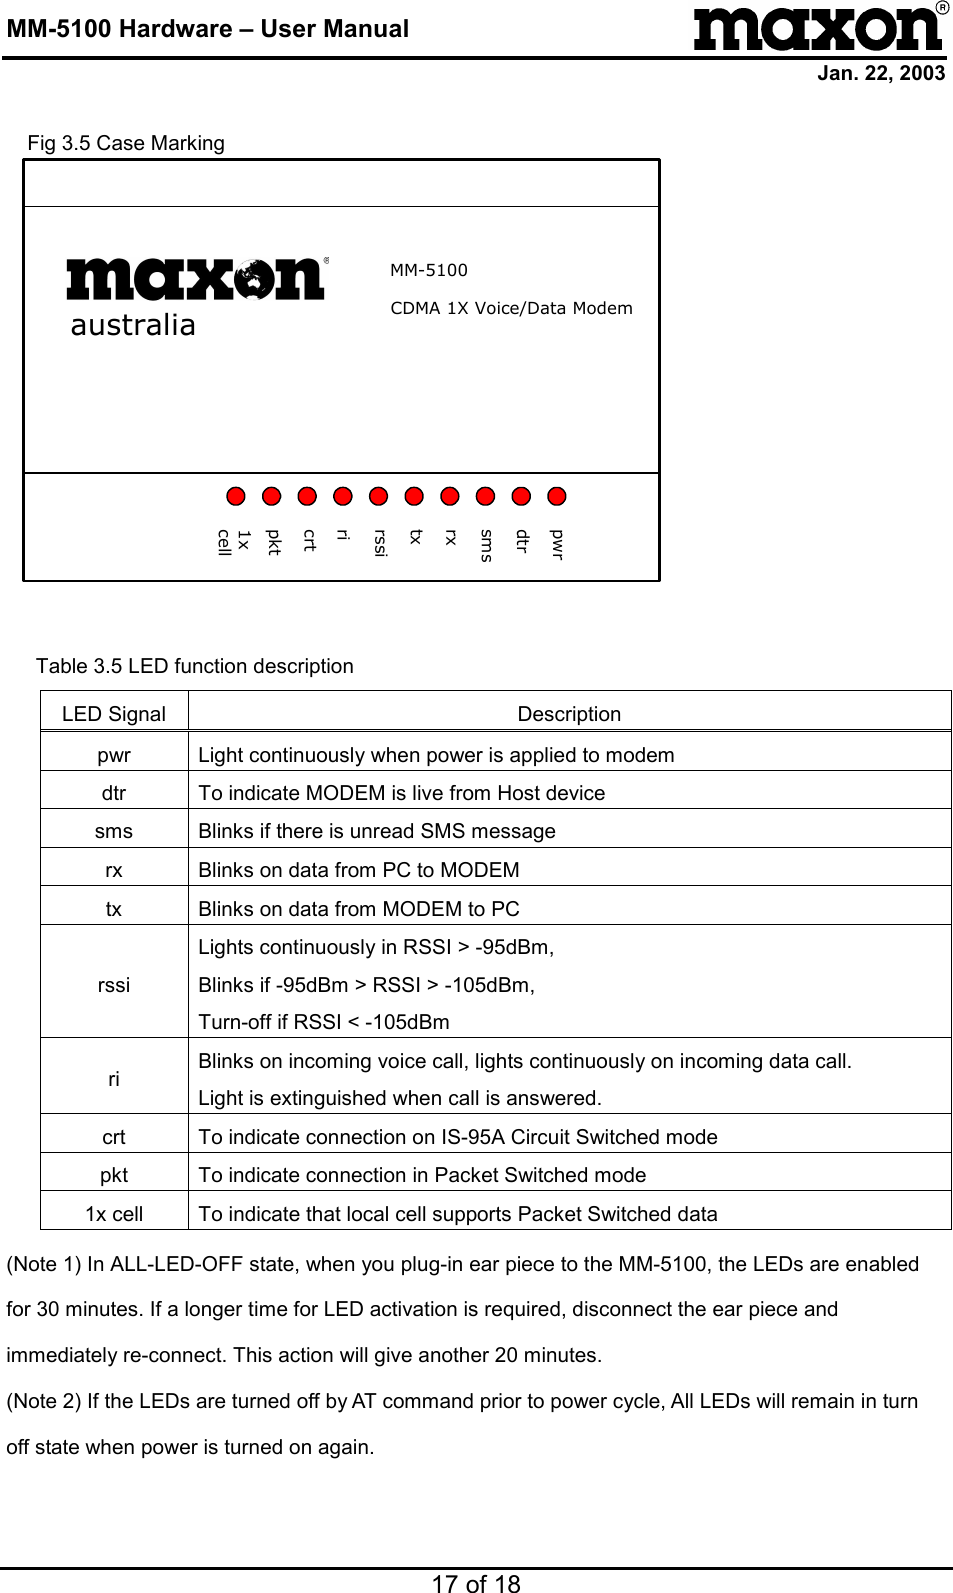 MM-5100 Hardware – User Manual Jan. 22, 2003 17 of 18     Fig 3.5 Case Marking    australiaMM-5100CDMA 1X Voice/Data Modempwrdtrpkt1xcellcrtrirssitxrxsms  Table 3.5 LED function description  LED Signal  Description pwr  Light continuously when power is applied to modem dtr  To indicate MODEM is live from Host device sms  Blinks if there is unread SMS message rx  Blinks on data from PC to MODEM tx  Blinks on data from MODEM to PC rssi Lights continuously in RSSI &gt; -95dBm, Blinks if -95dBm &gt; RSSI &gt; -105dBm, Turn-off if RSSI &lt; -105dBm ri  Blinks on incoming voice call, lights continuously on incoming data call. Light is extinguished when call is answered. crt  To indicate connection on IS-95A Circuit Switched mode pkt  To indicate connection in Packet Switched mode 1x cell  To indicate that local cell supports Packet Switched data (Note 1) In ALL-LED-OFF state, when you plug-in ear piece to the MM-5100, the LEDs are enabled for 30 minutes. If a longer time for LED activation is required, disconnect the ear piece and immediately re-connect. This action will give another 20 minutes. (Note 2) If the LEDs are turned off by AT command prior to power cycle, All LEDs will remain in turn off state when power is turned on again. 